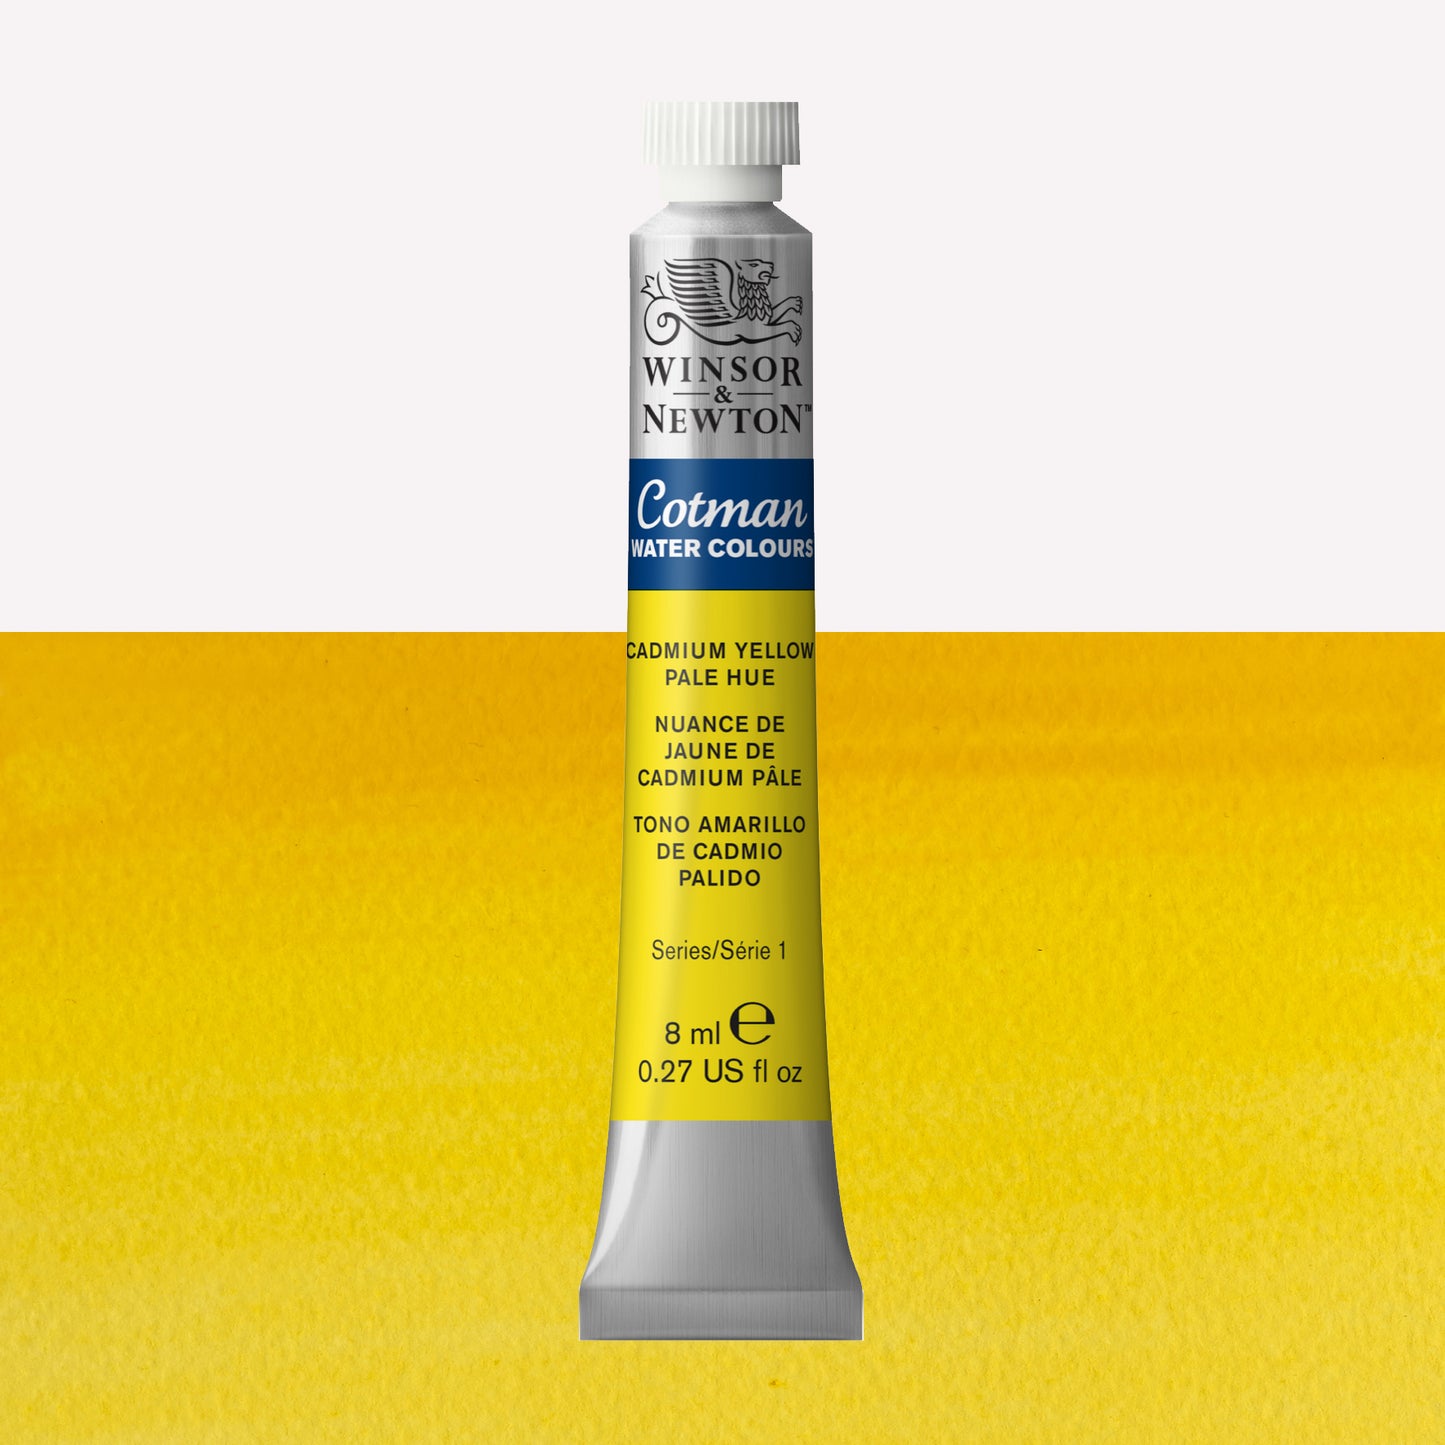 Winsor & Newton Cotman watercolour paint packaged in 8ml silver tubes with a white lid in the shade Cadmium Yellow Hue Pale over a strong light yellow colour swatch.